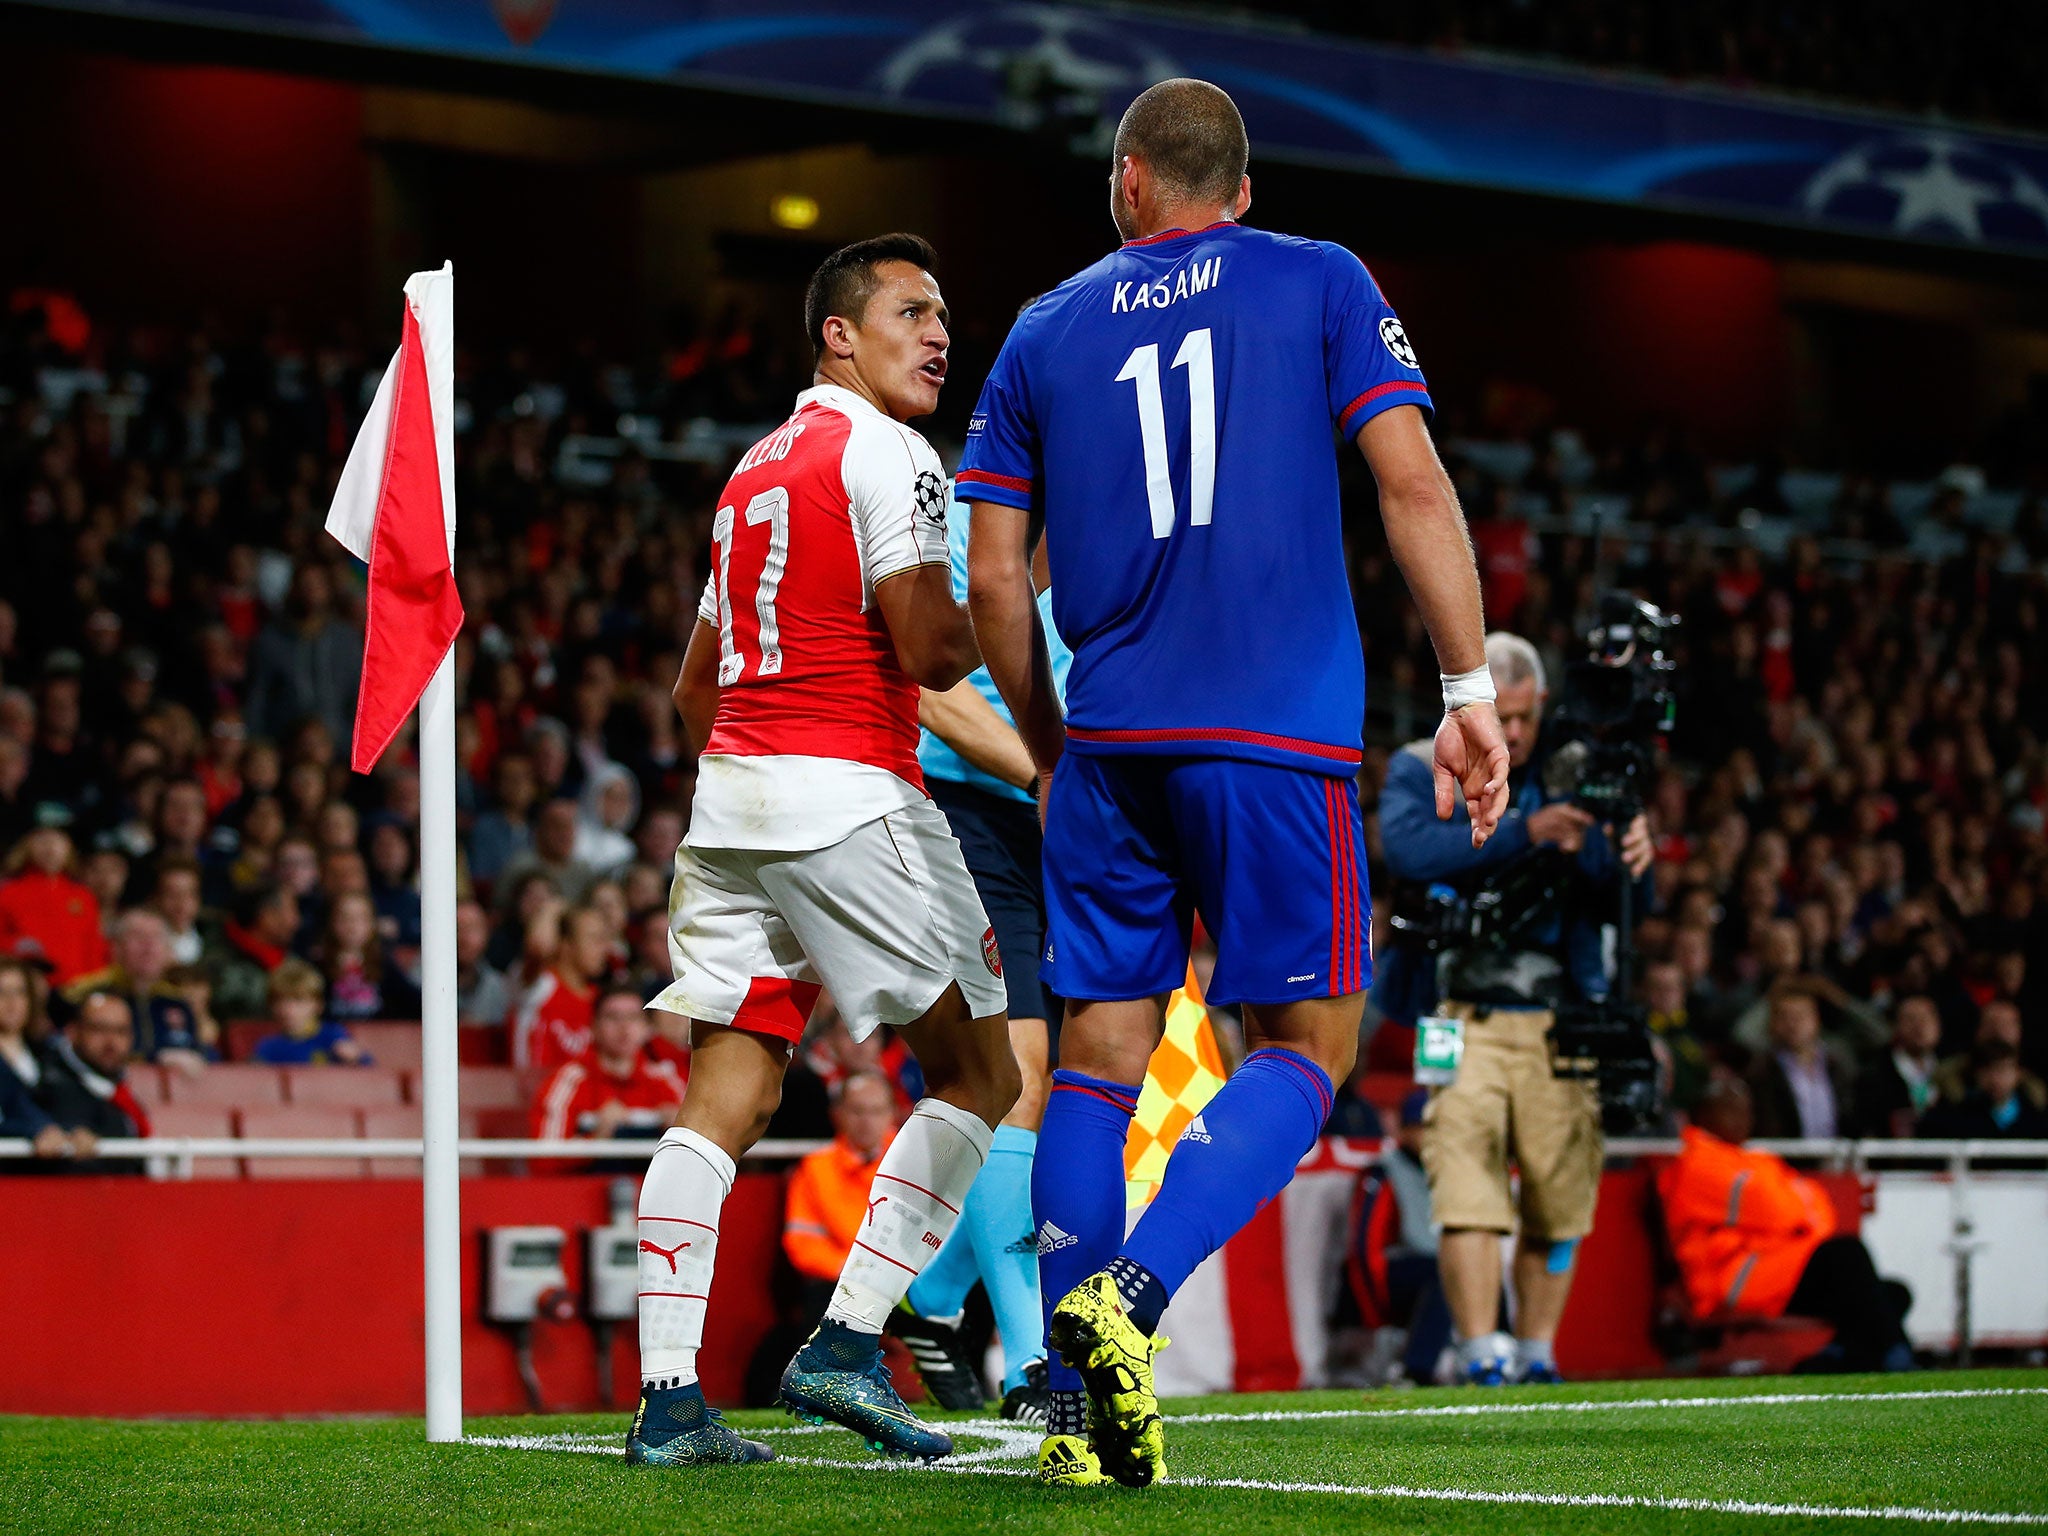 Alexis Sanchez of Arsenal exchanges words with Pajtim Kasami of Olympiacos